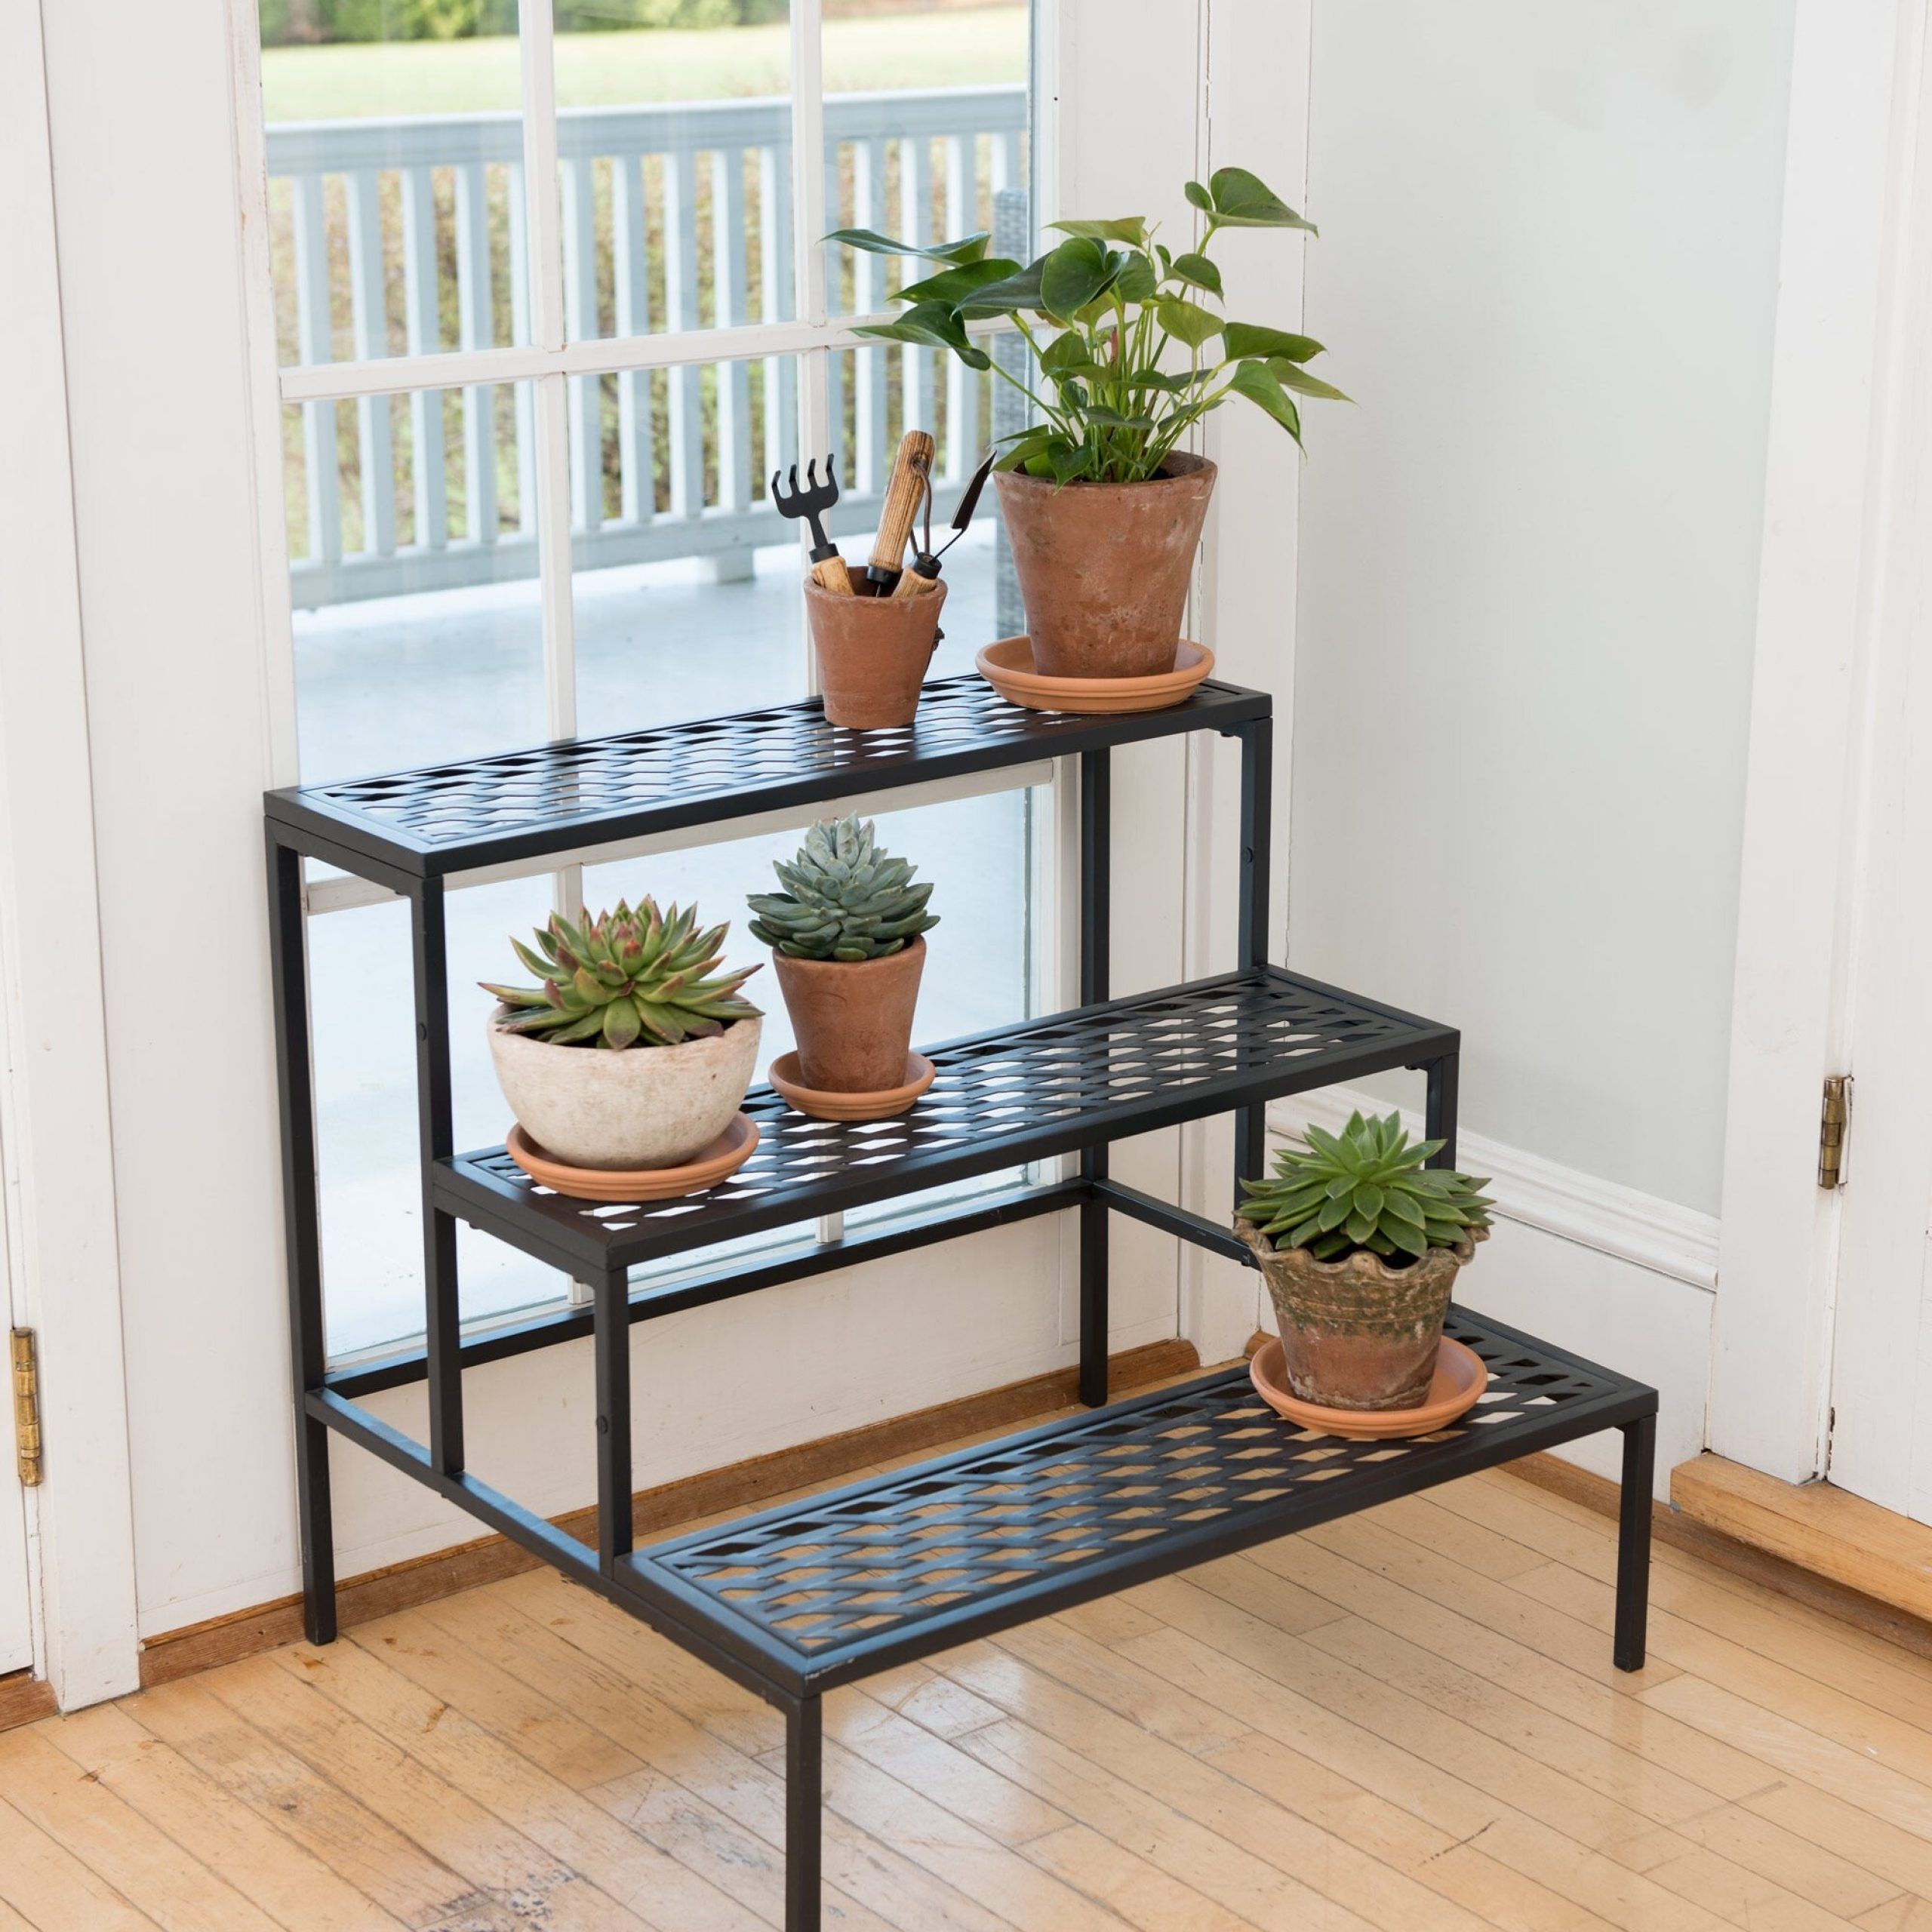 Lattice Multi Tiered Plant Stand – Black | Gardener's Supply Throughout Three Tier Plant Stands (View 2 of 15)